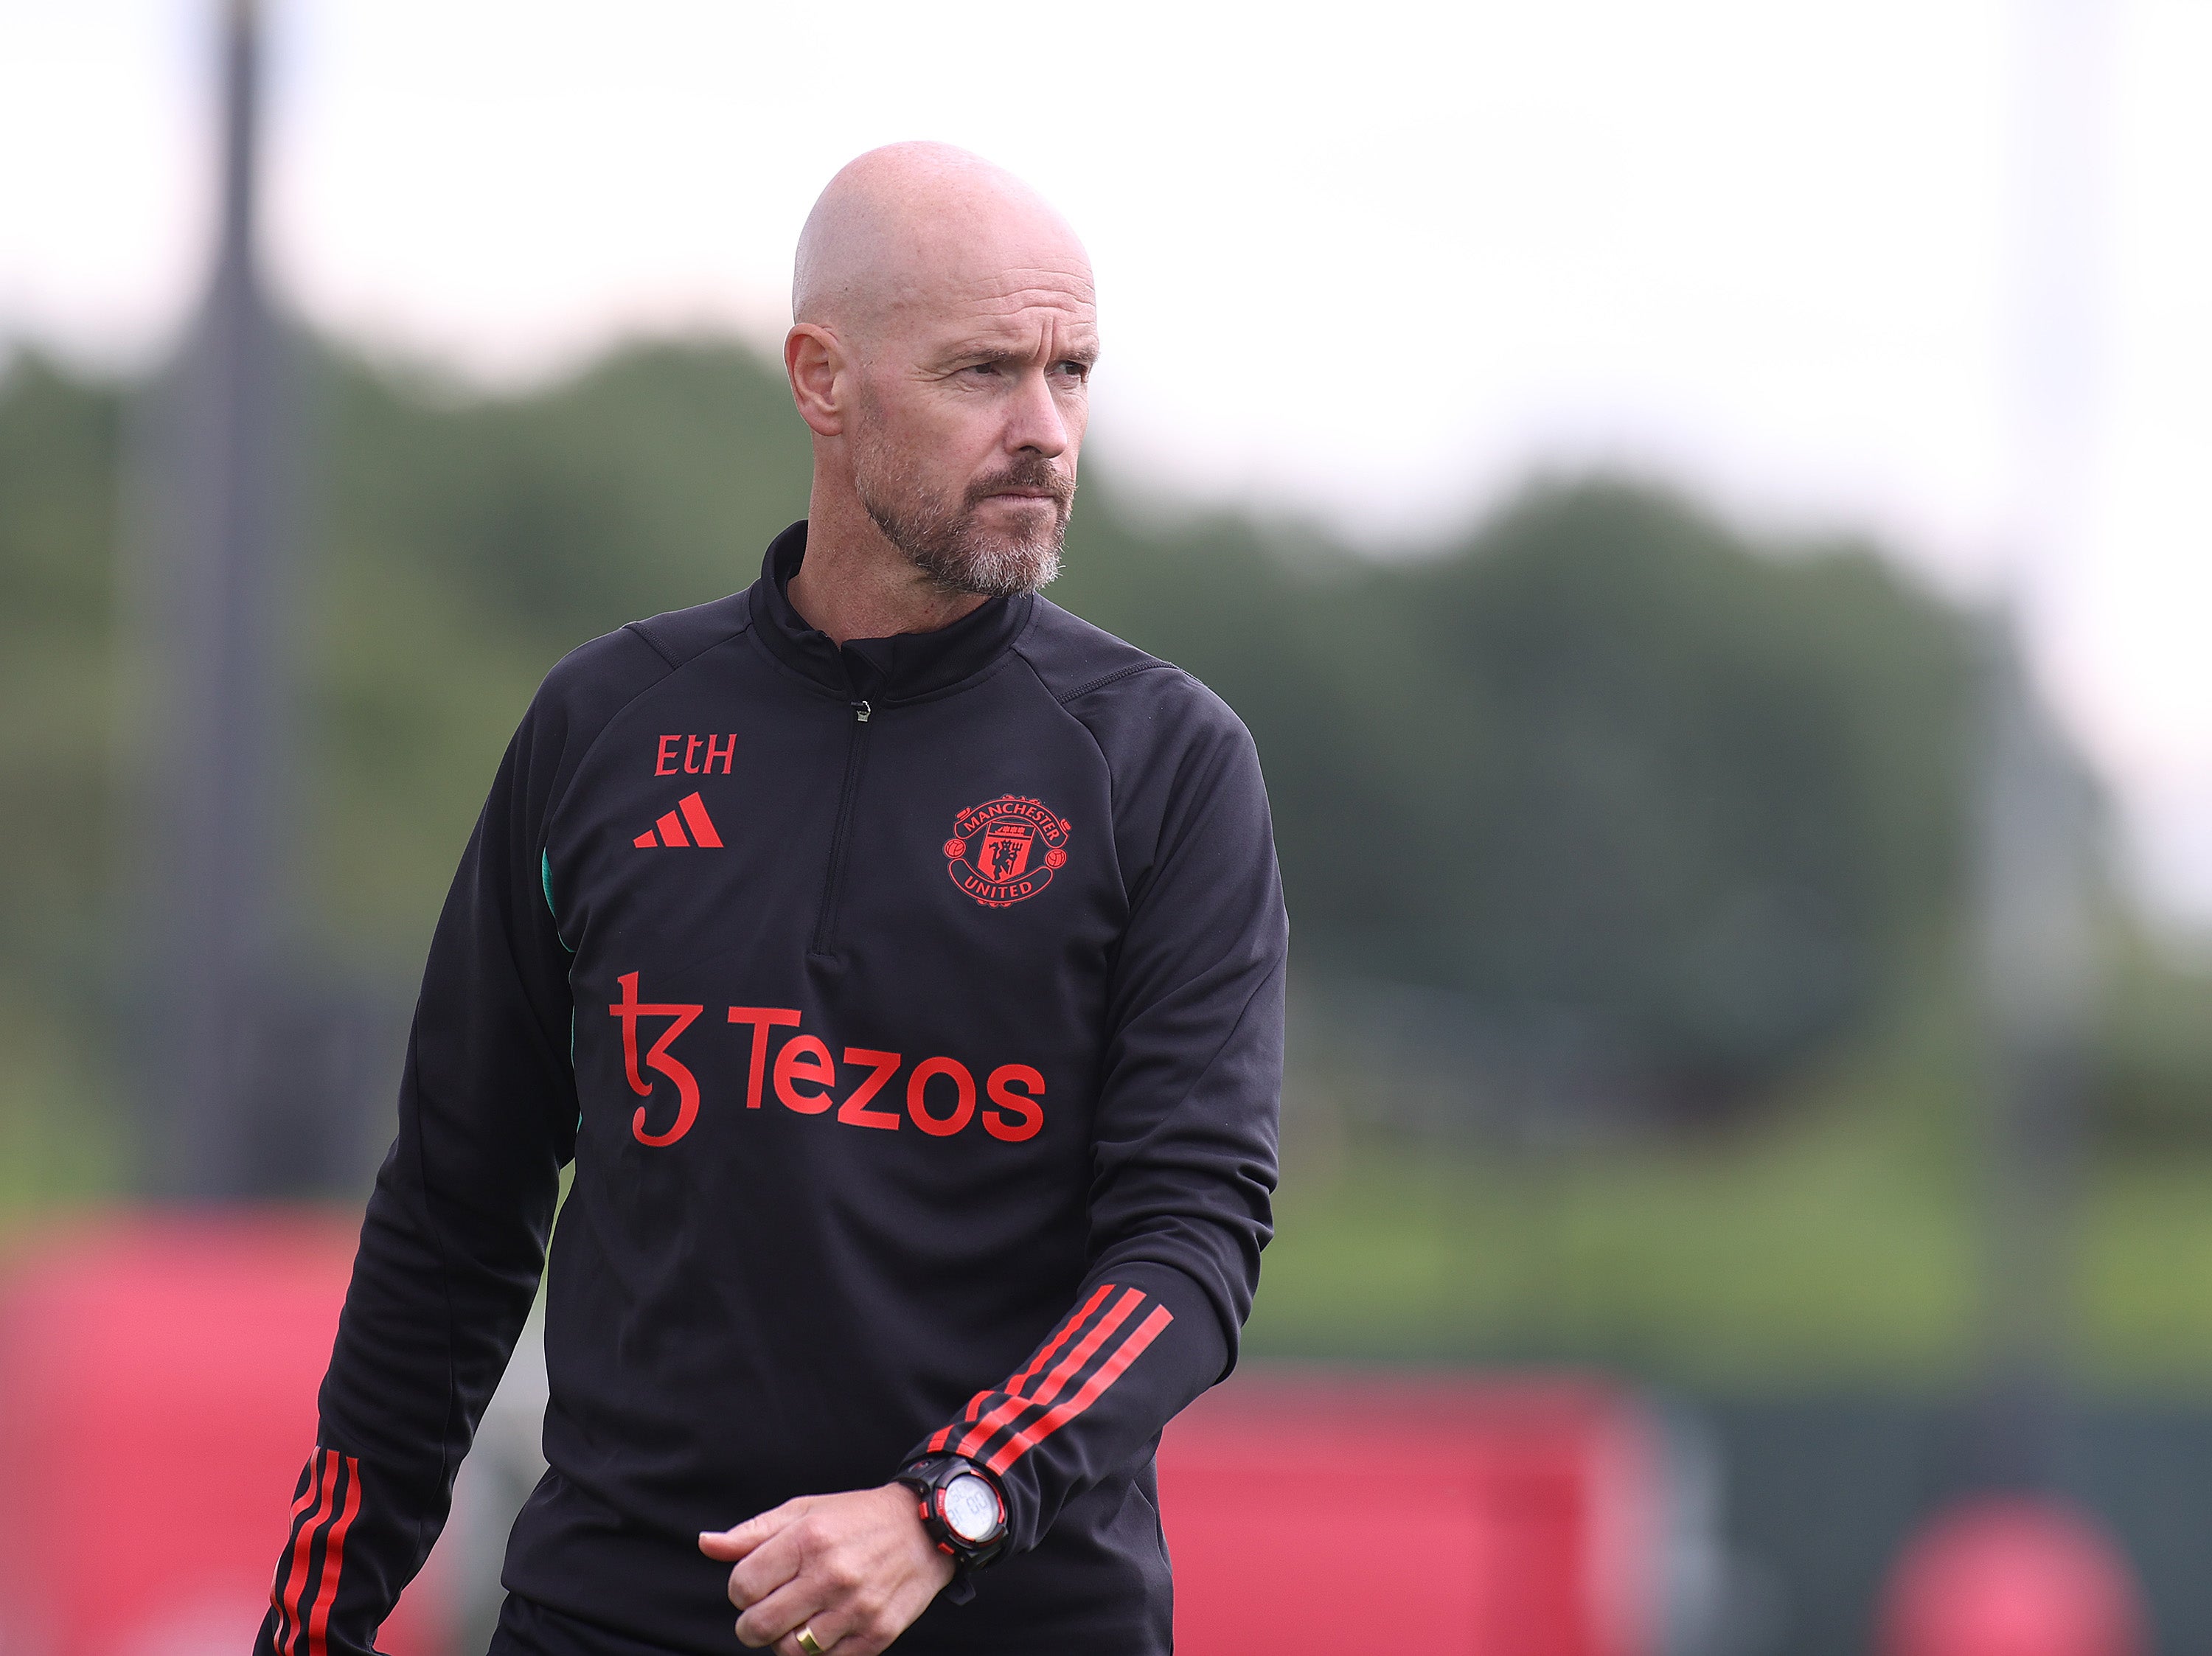 Ten Hag said last month United should not talk about themselves as title contenders, arguing only Man City could